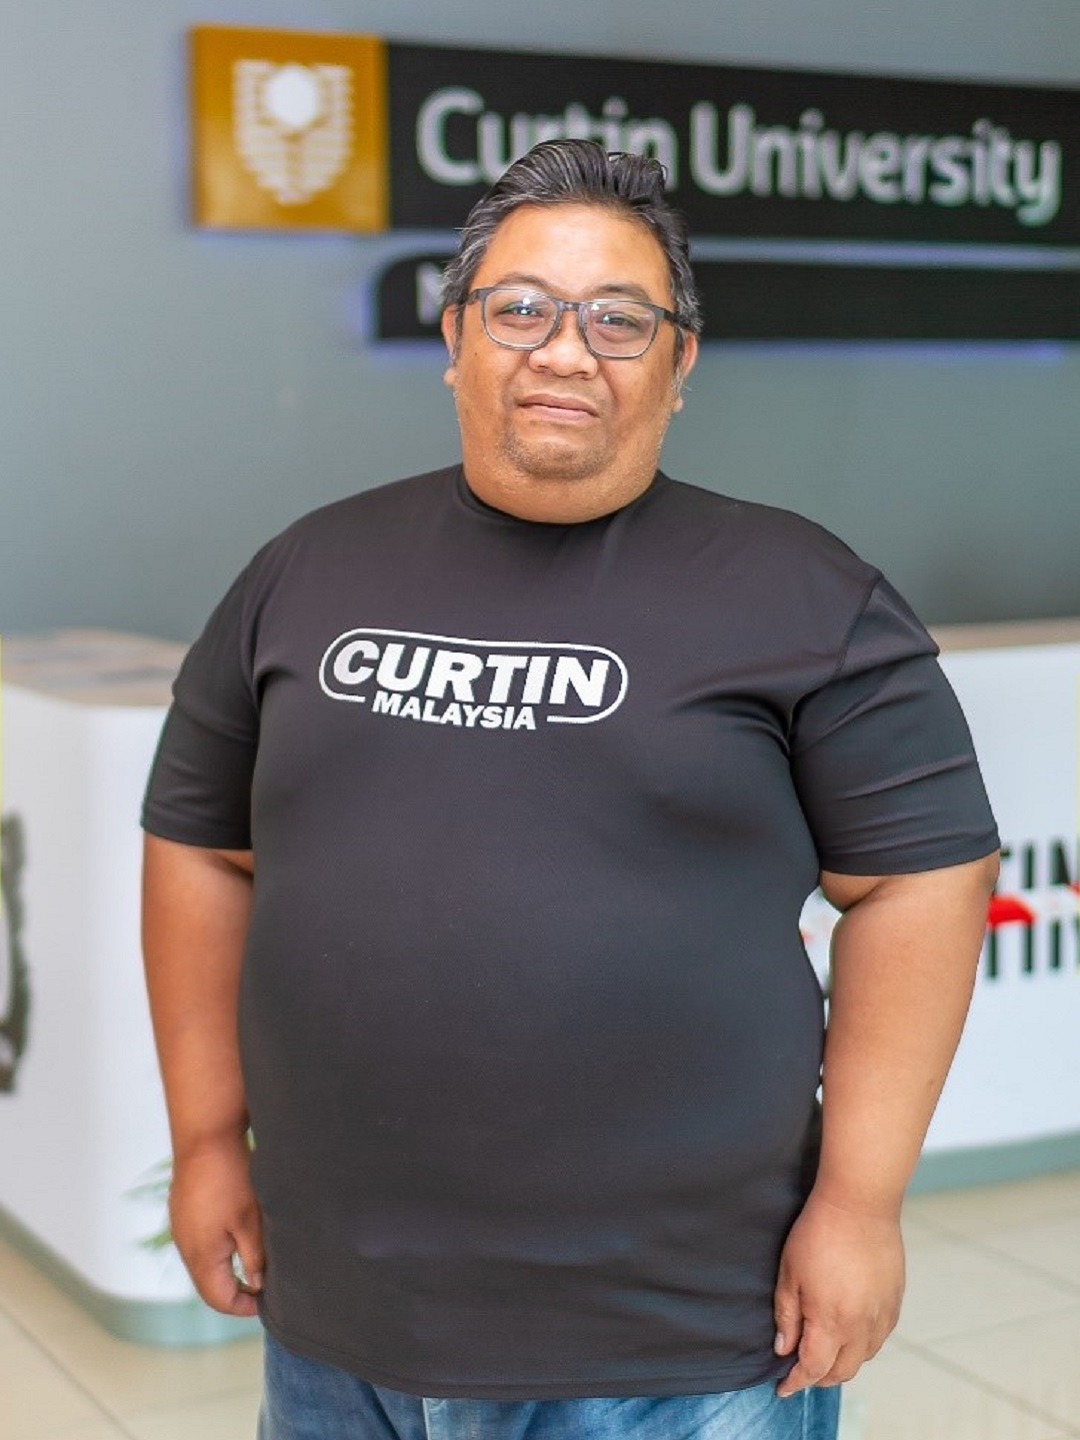 “I started my career at Curtin Malaysia in April 2013 as Library Assistant. A week after I joined, I was invited to join the graduations team as an usher as there was an upcoming graduation ceremony. It was heartening to see all the joyful and happy...